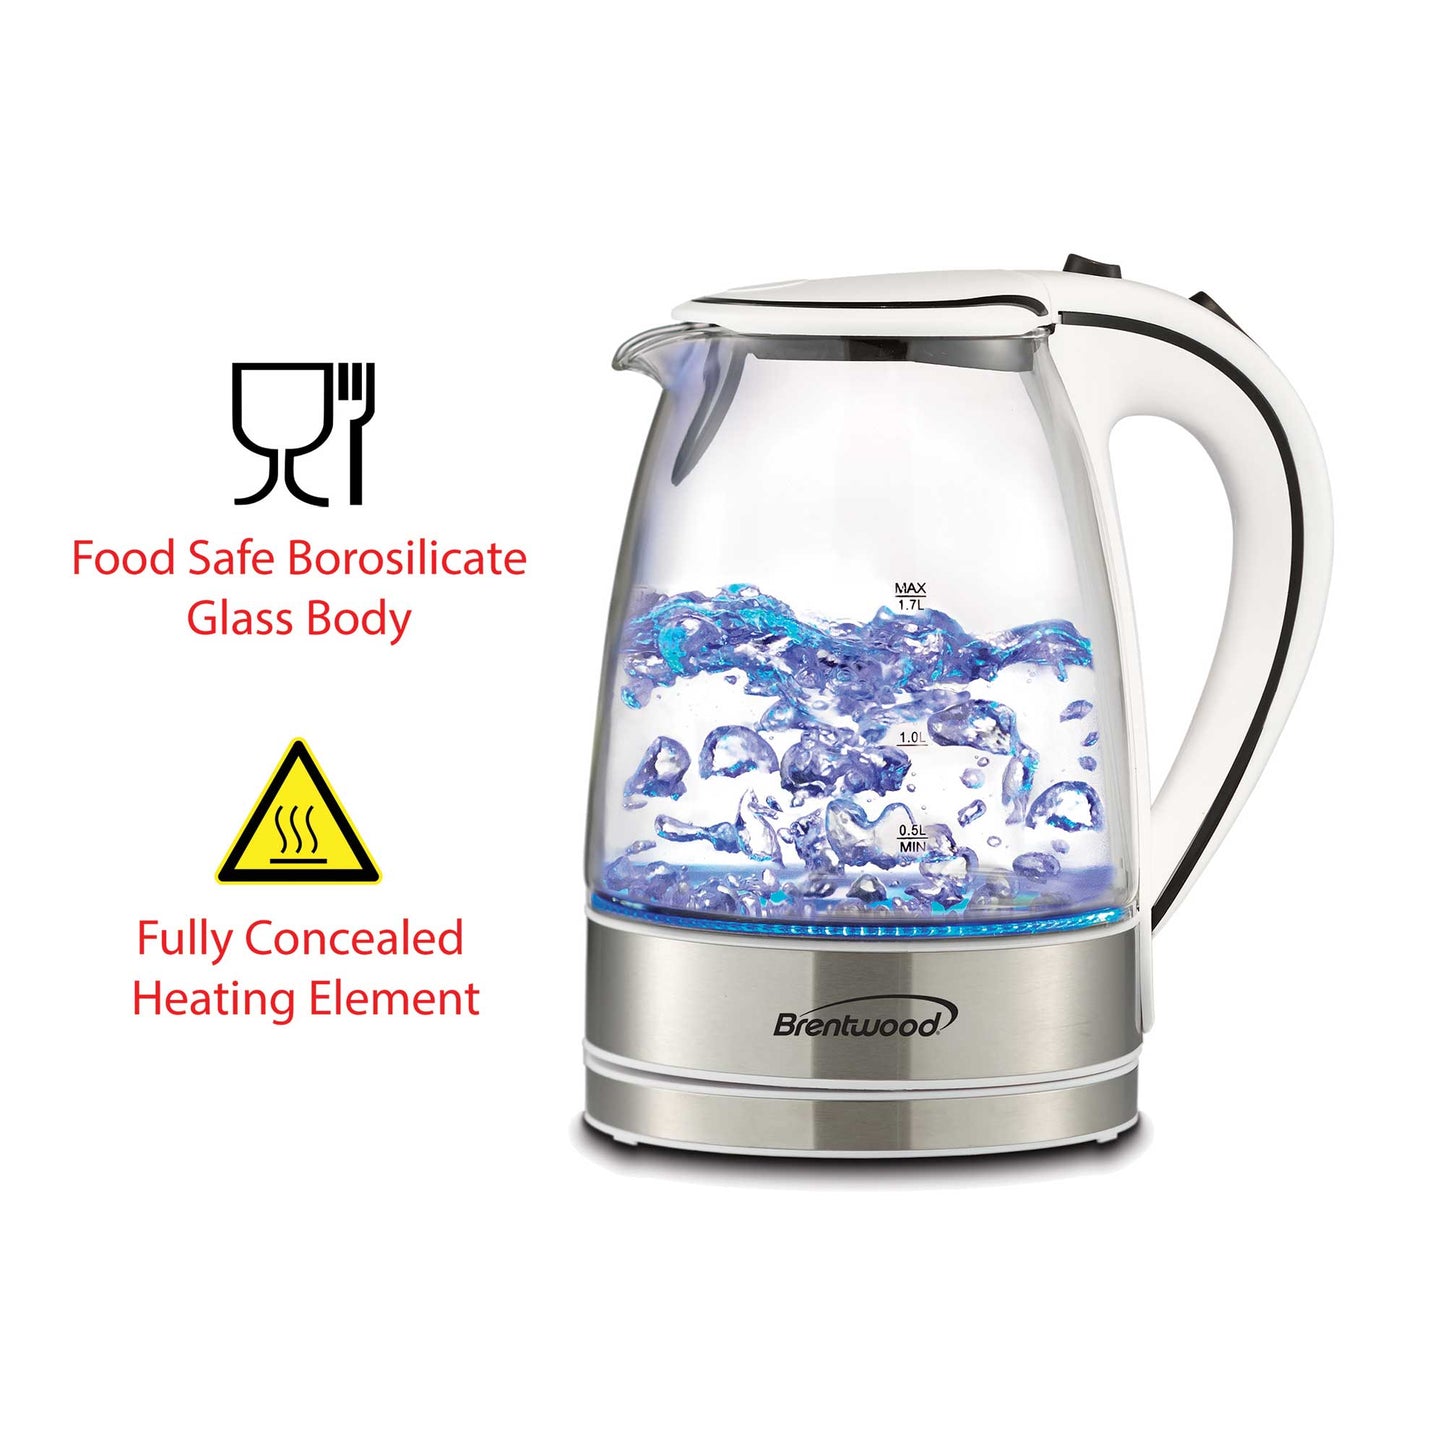 1.7L Brentwood Cordless Glass Kettle